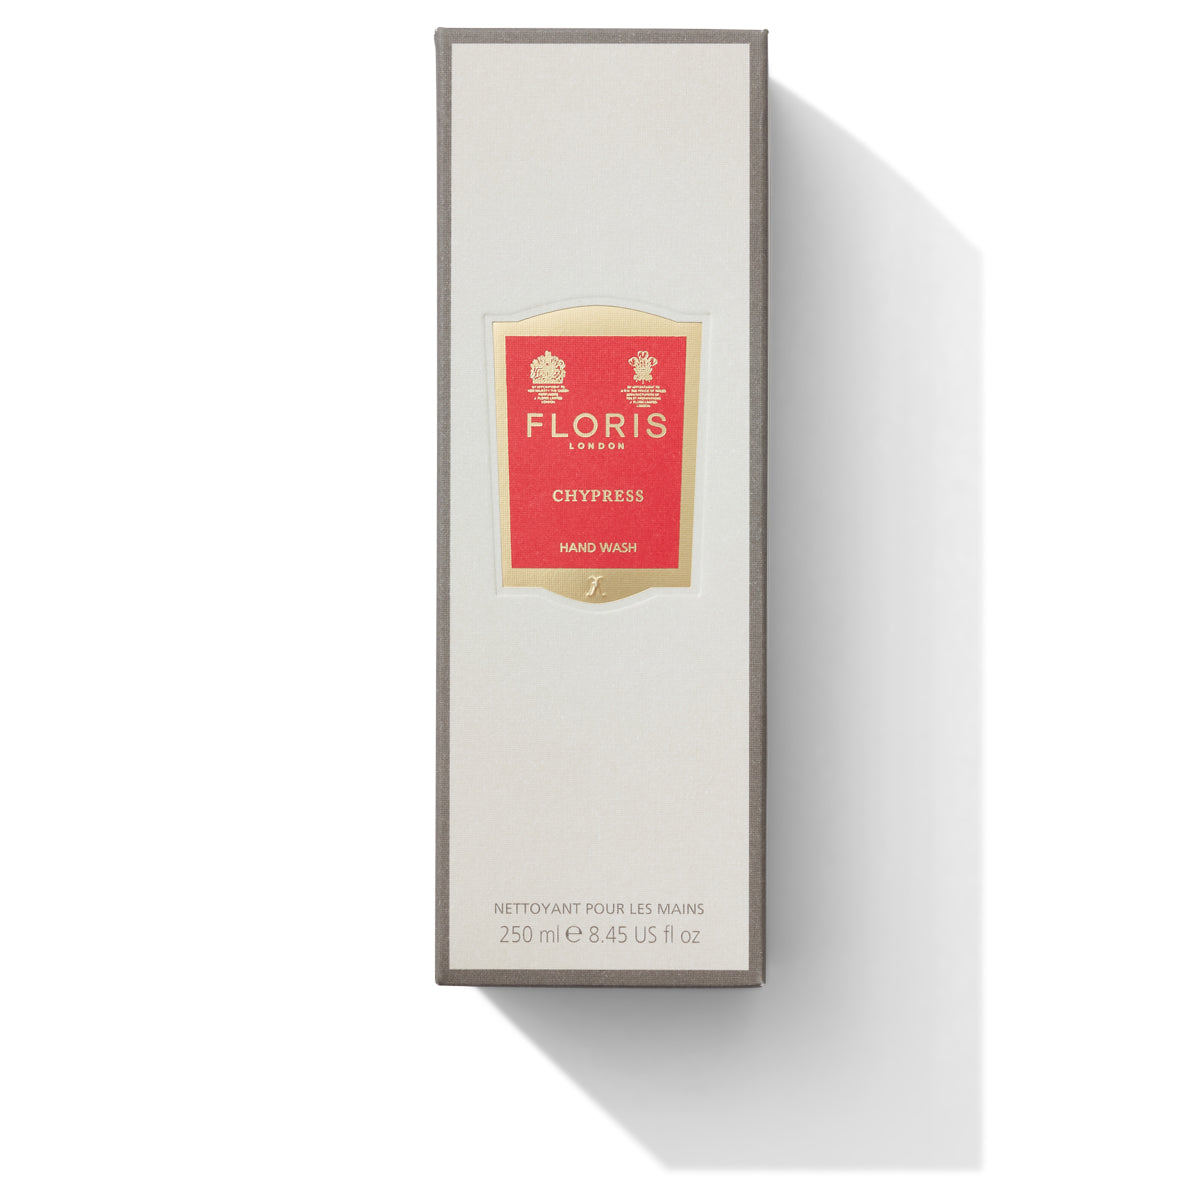 White box for Chypress hand wash from floris